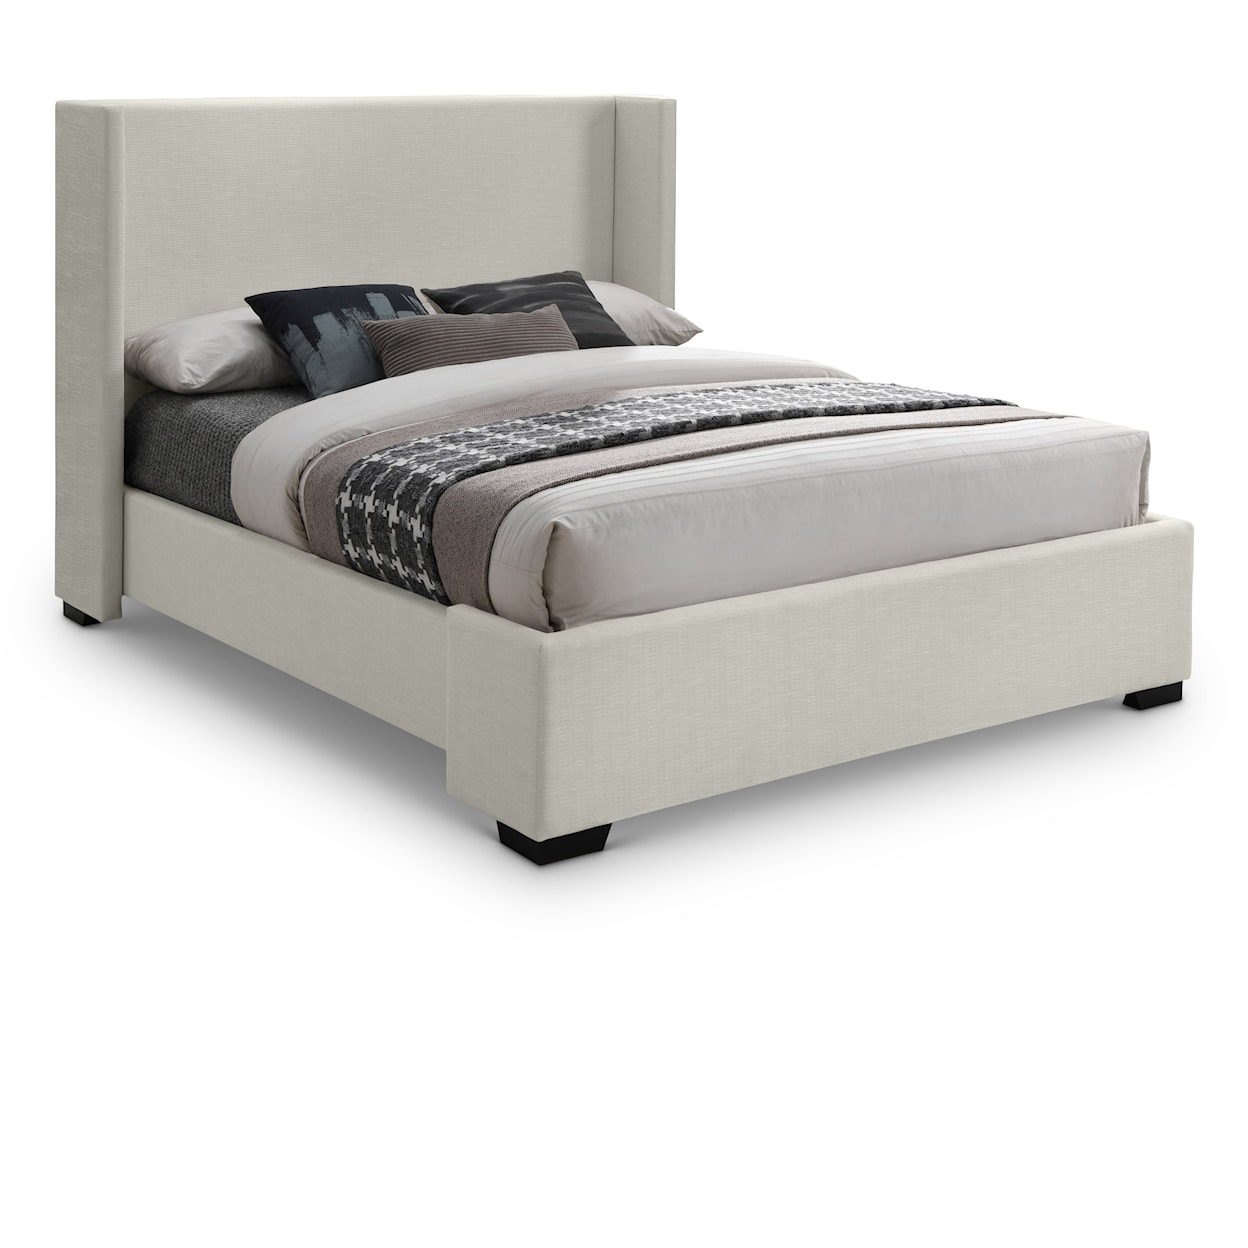 Meridian Furniture Oxford Full Bed (3 Boxes)